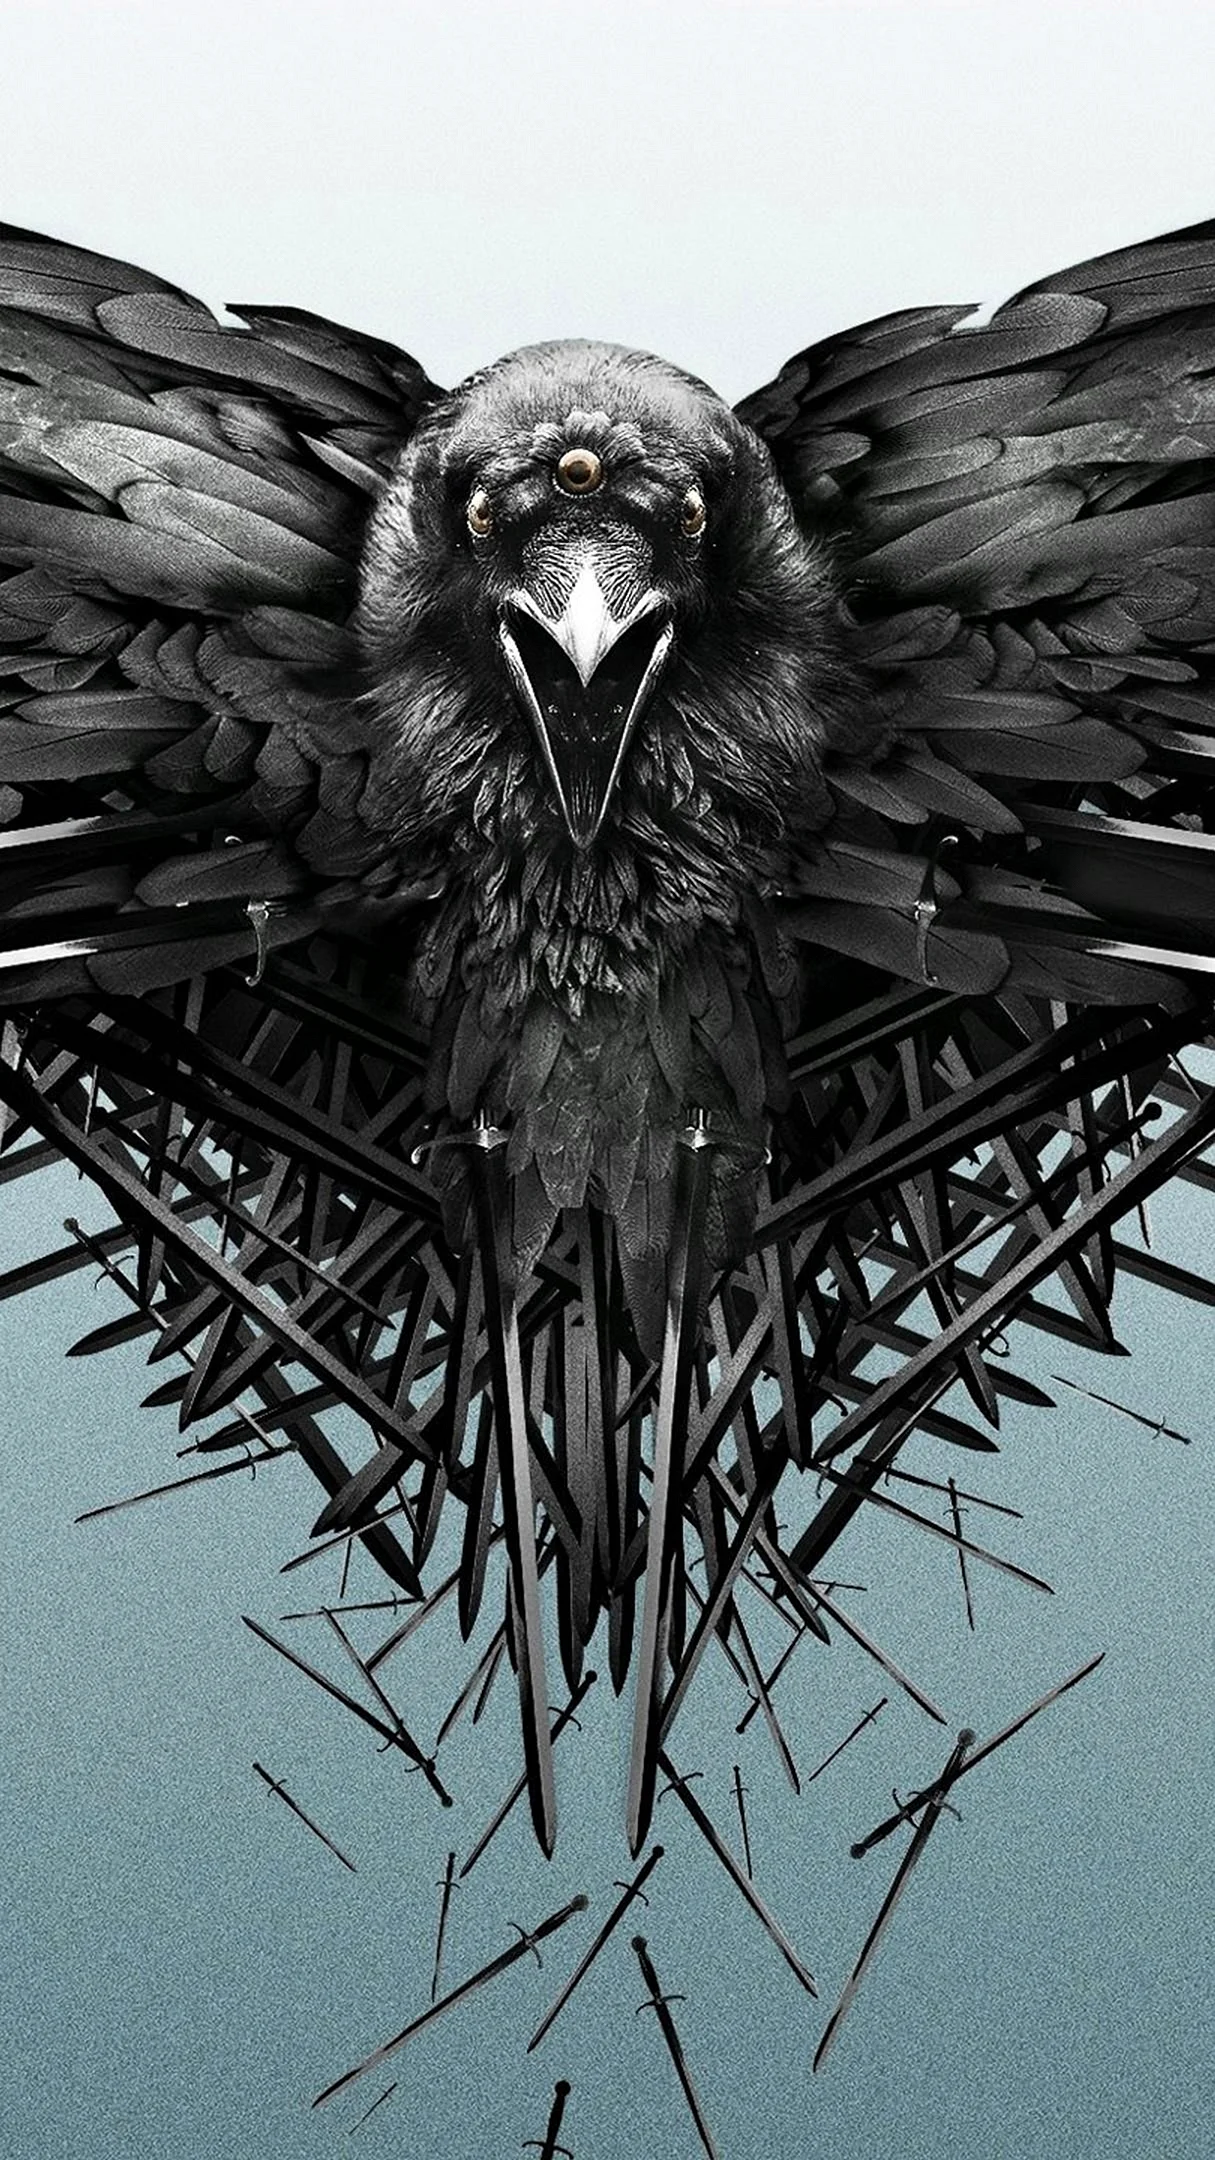 Three Eyed Raven Wallpaper For iPhone